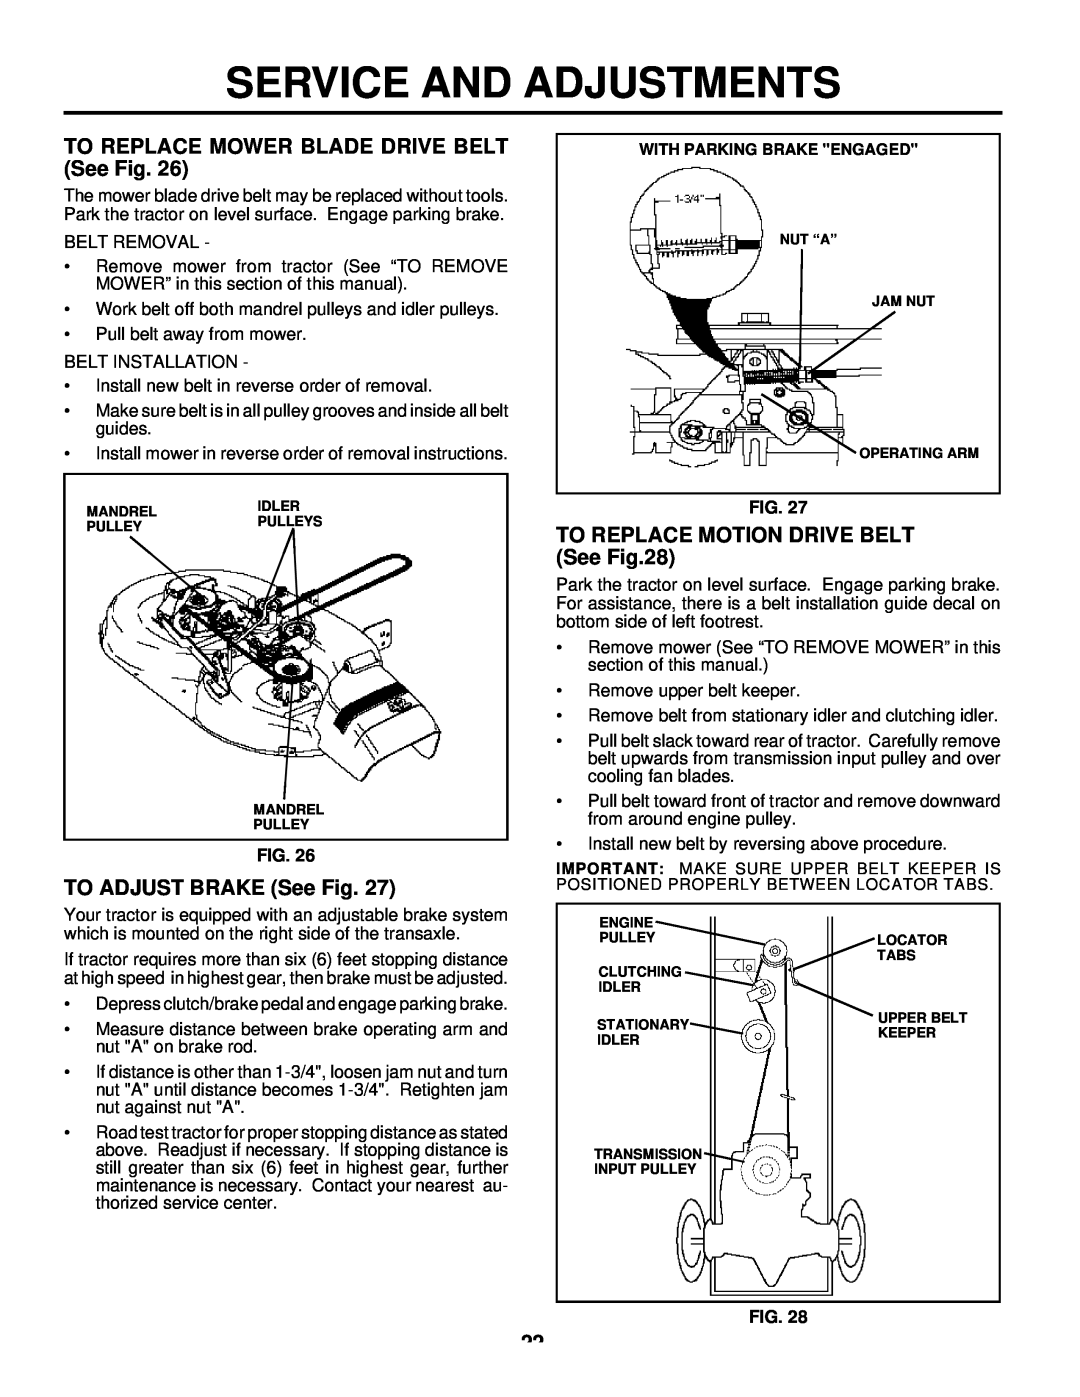 Husqvarna LTH125 TO REPLACE MOWER BLADE DRIVE BELT See Fig, TO ADJUST BRAKE See Fig, TO REPLACE MOTION DRIVE BELT See 